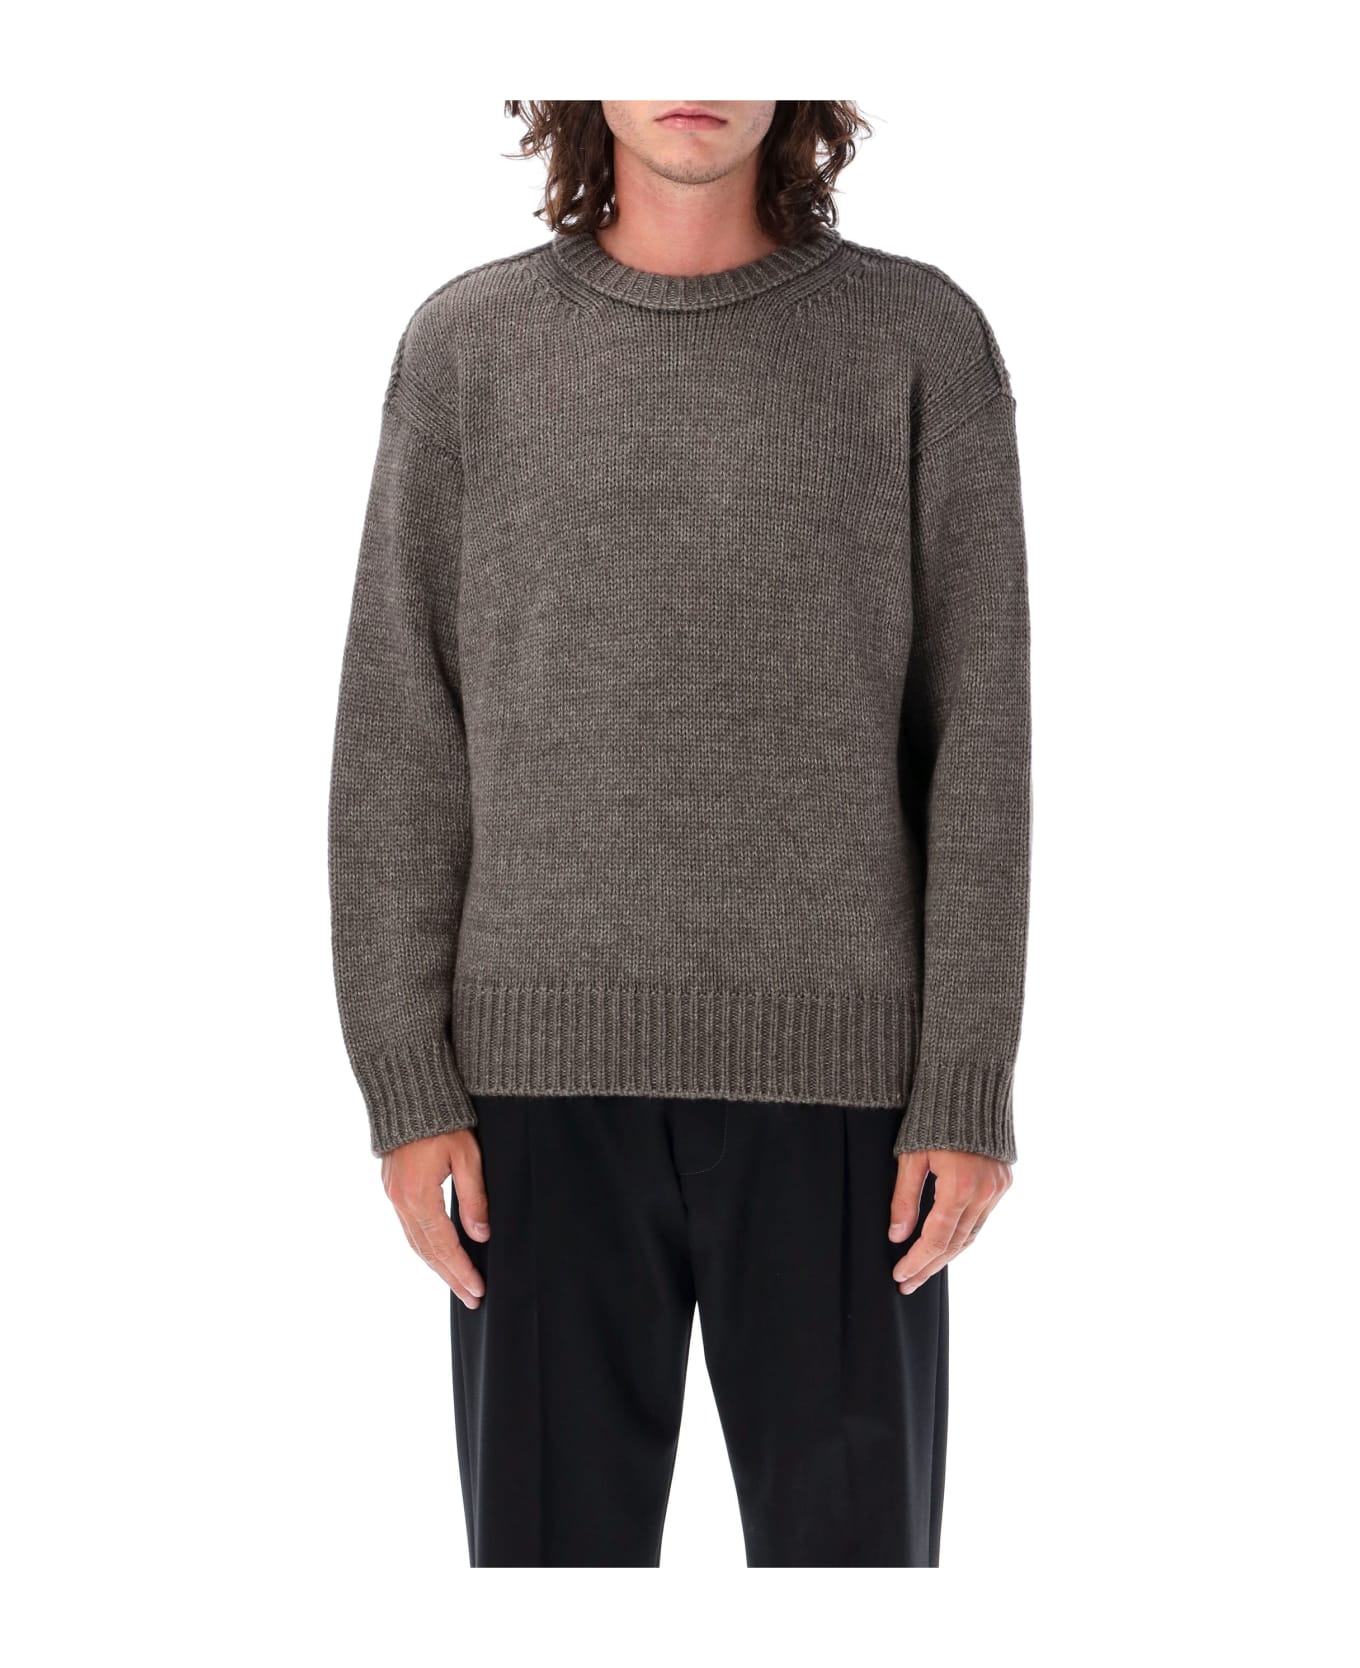 Lemaire Boxy Sweater - Grey